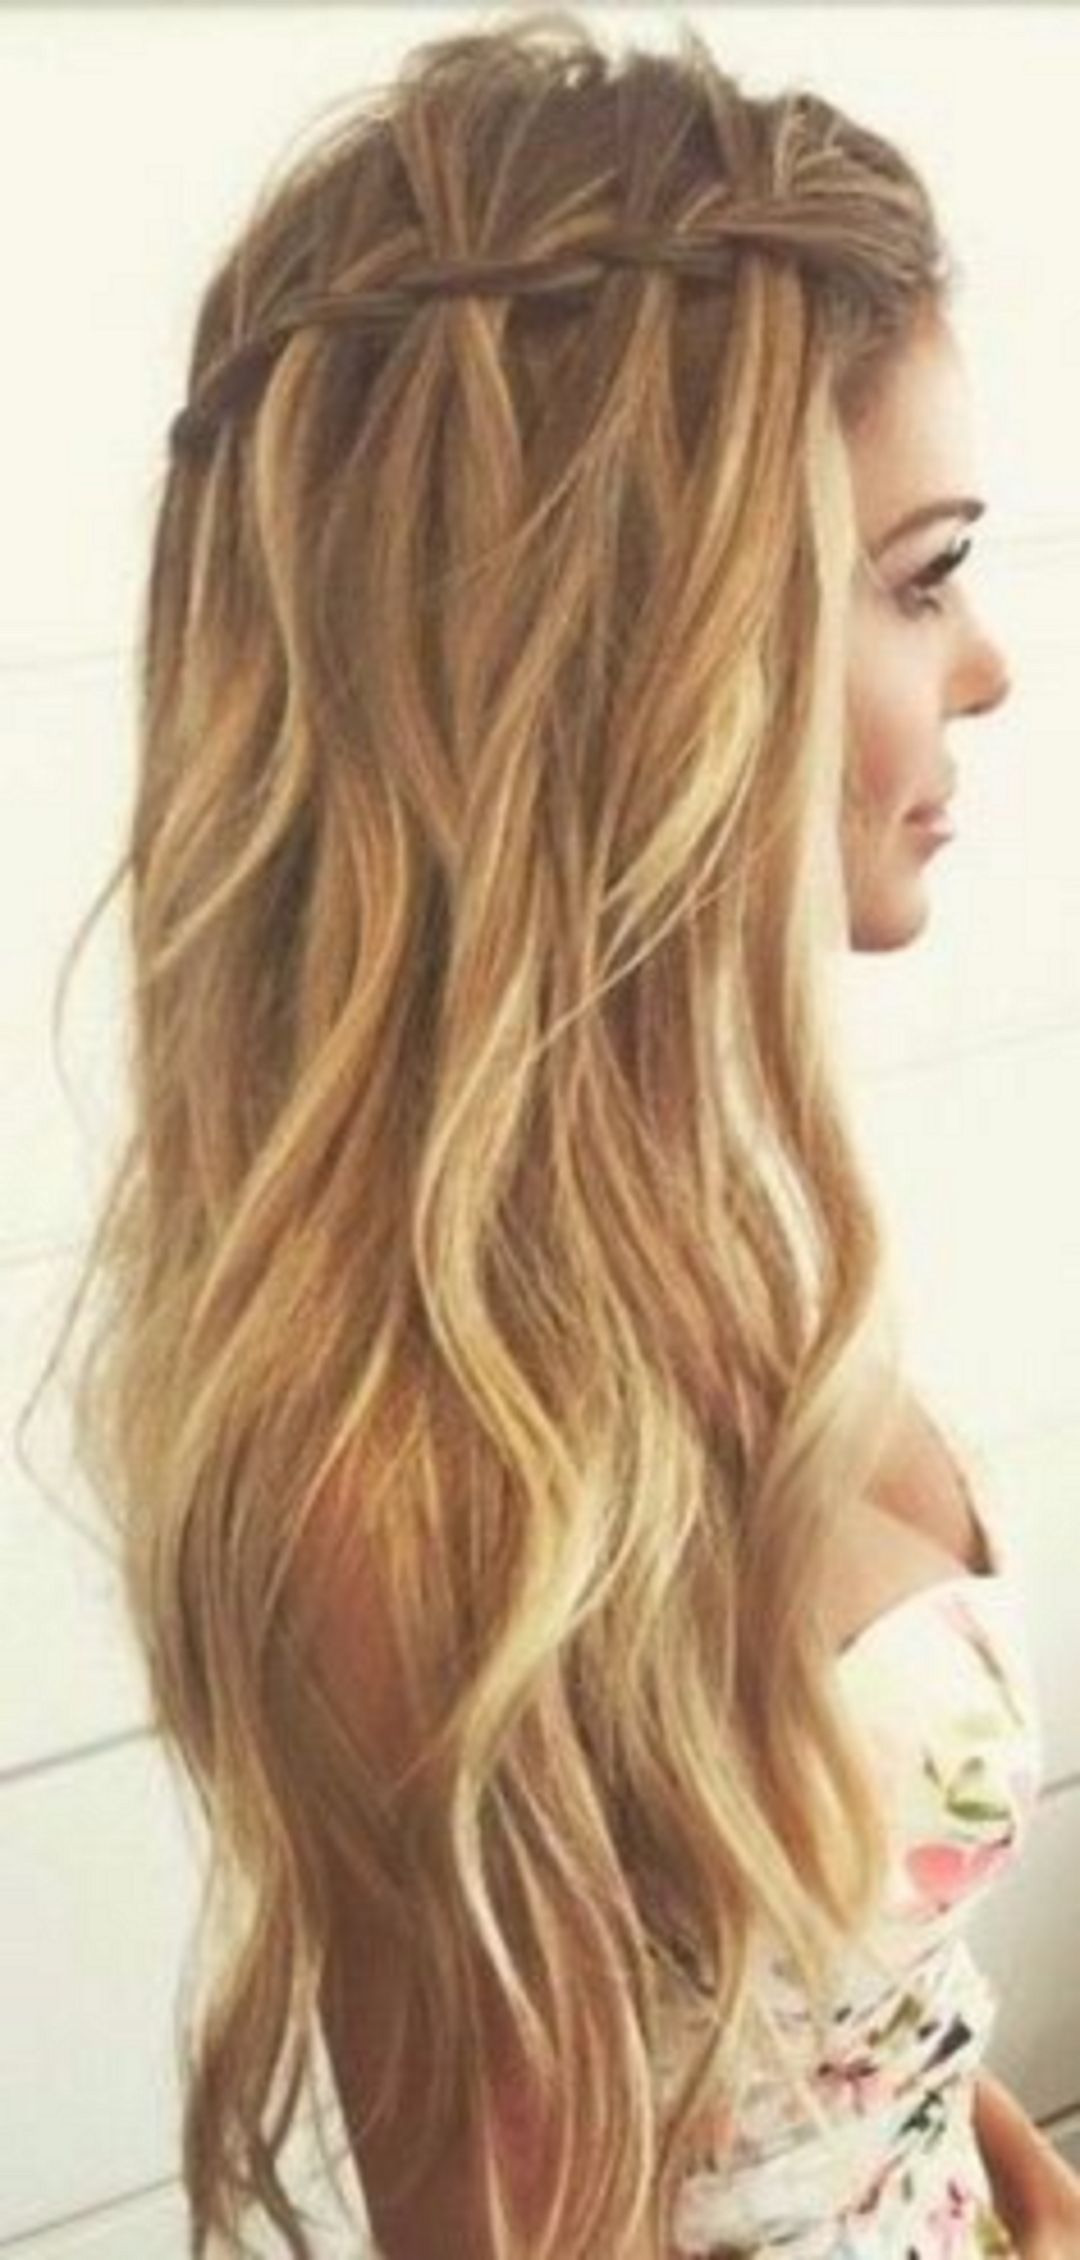 Beach Waves Hair You Need to Check - All For Fashions - fashion ...